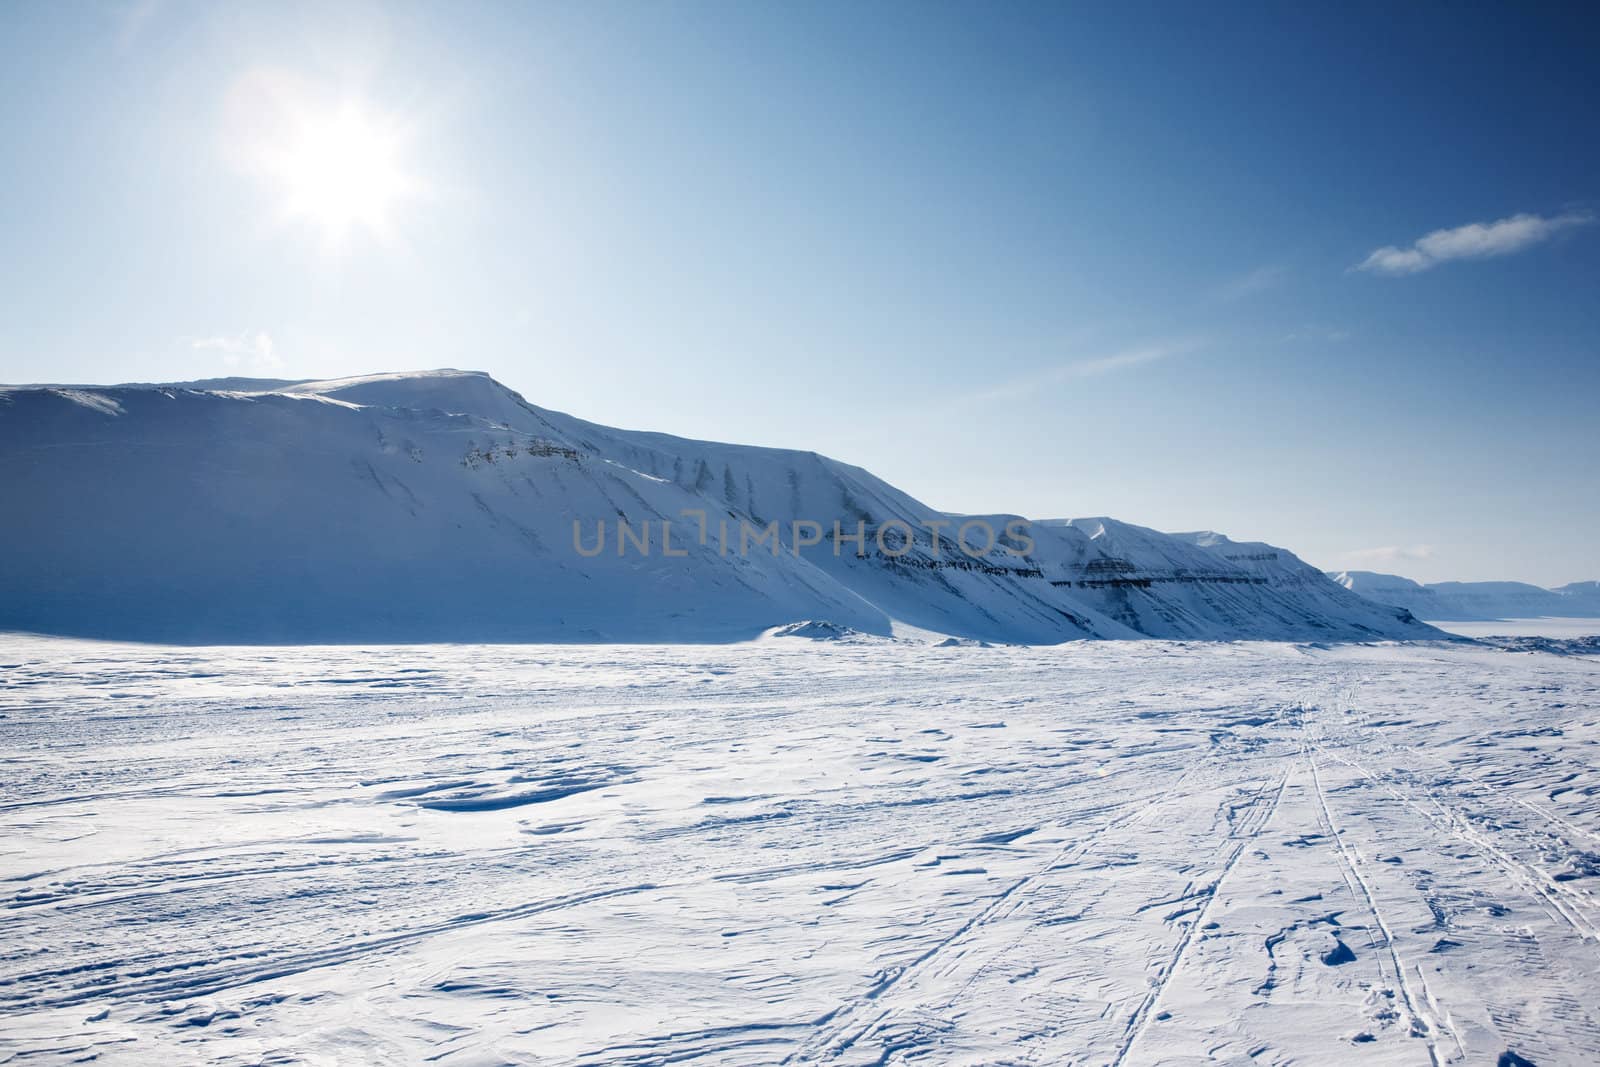 A beautiful winter landscape with a mountain and deep blue sky